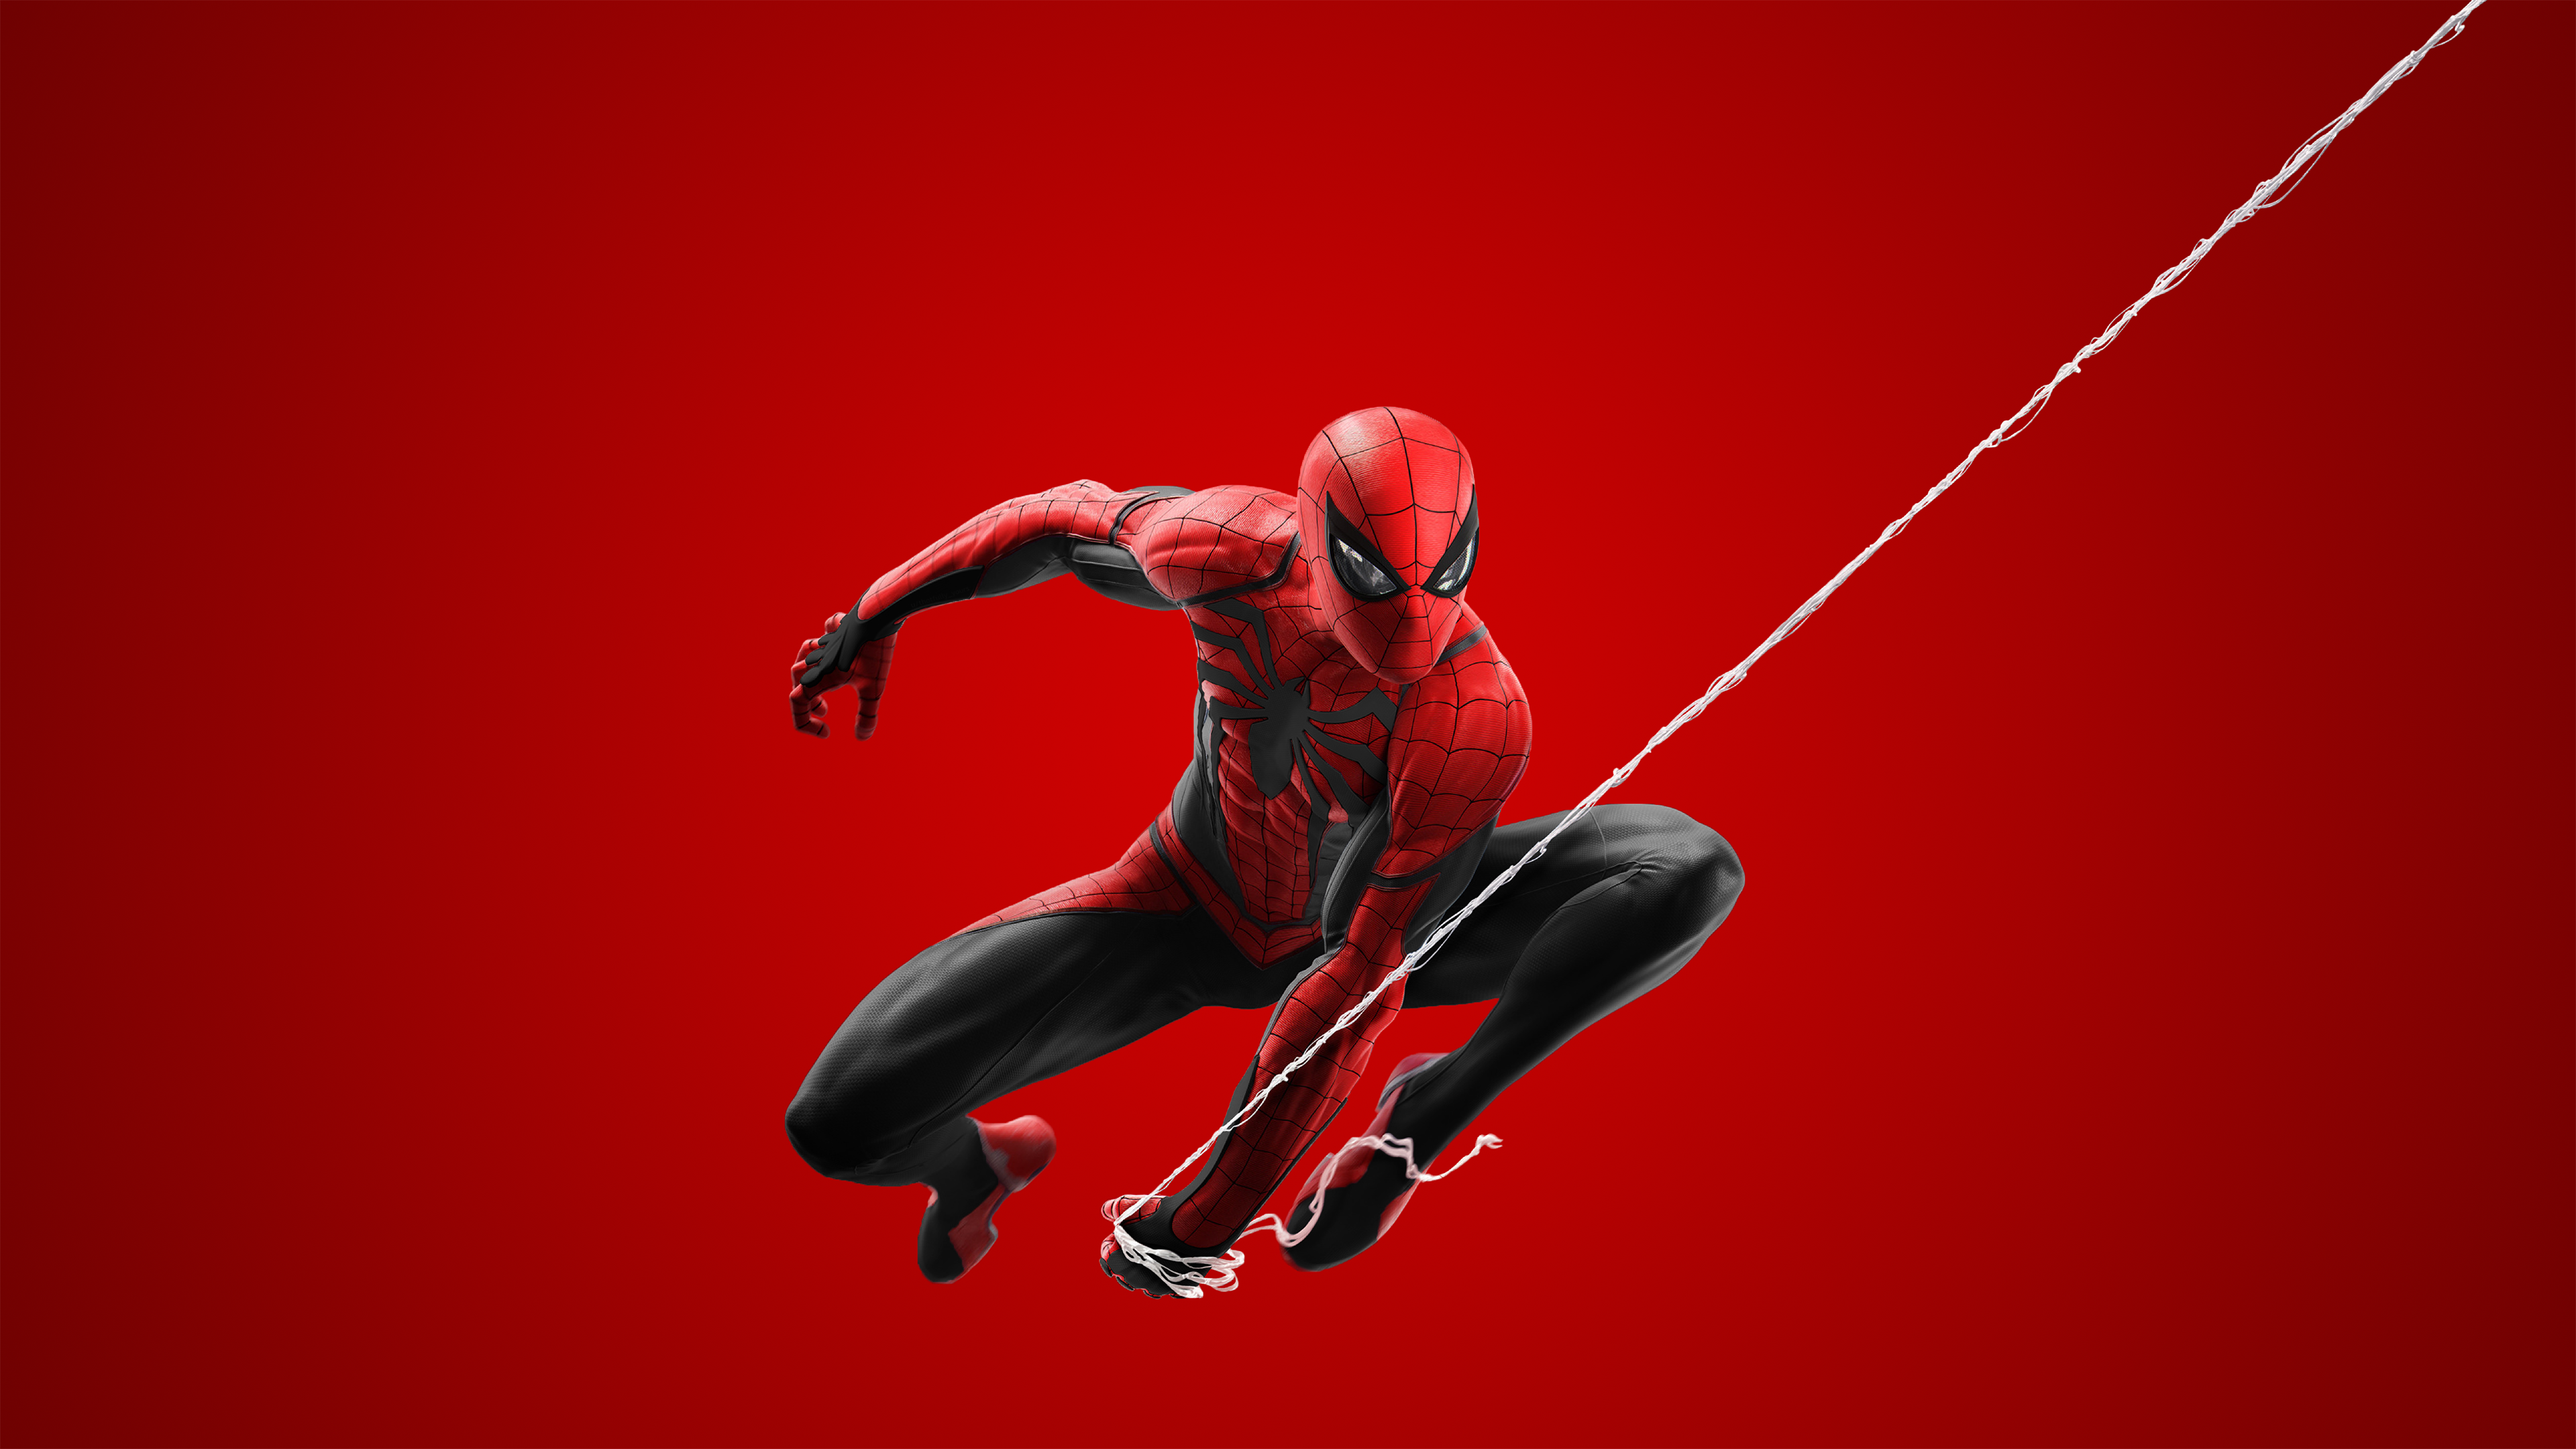 4K Wallpaper of a slightly more. 'Superior' version of the PS4 Suit